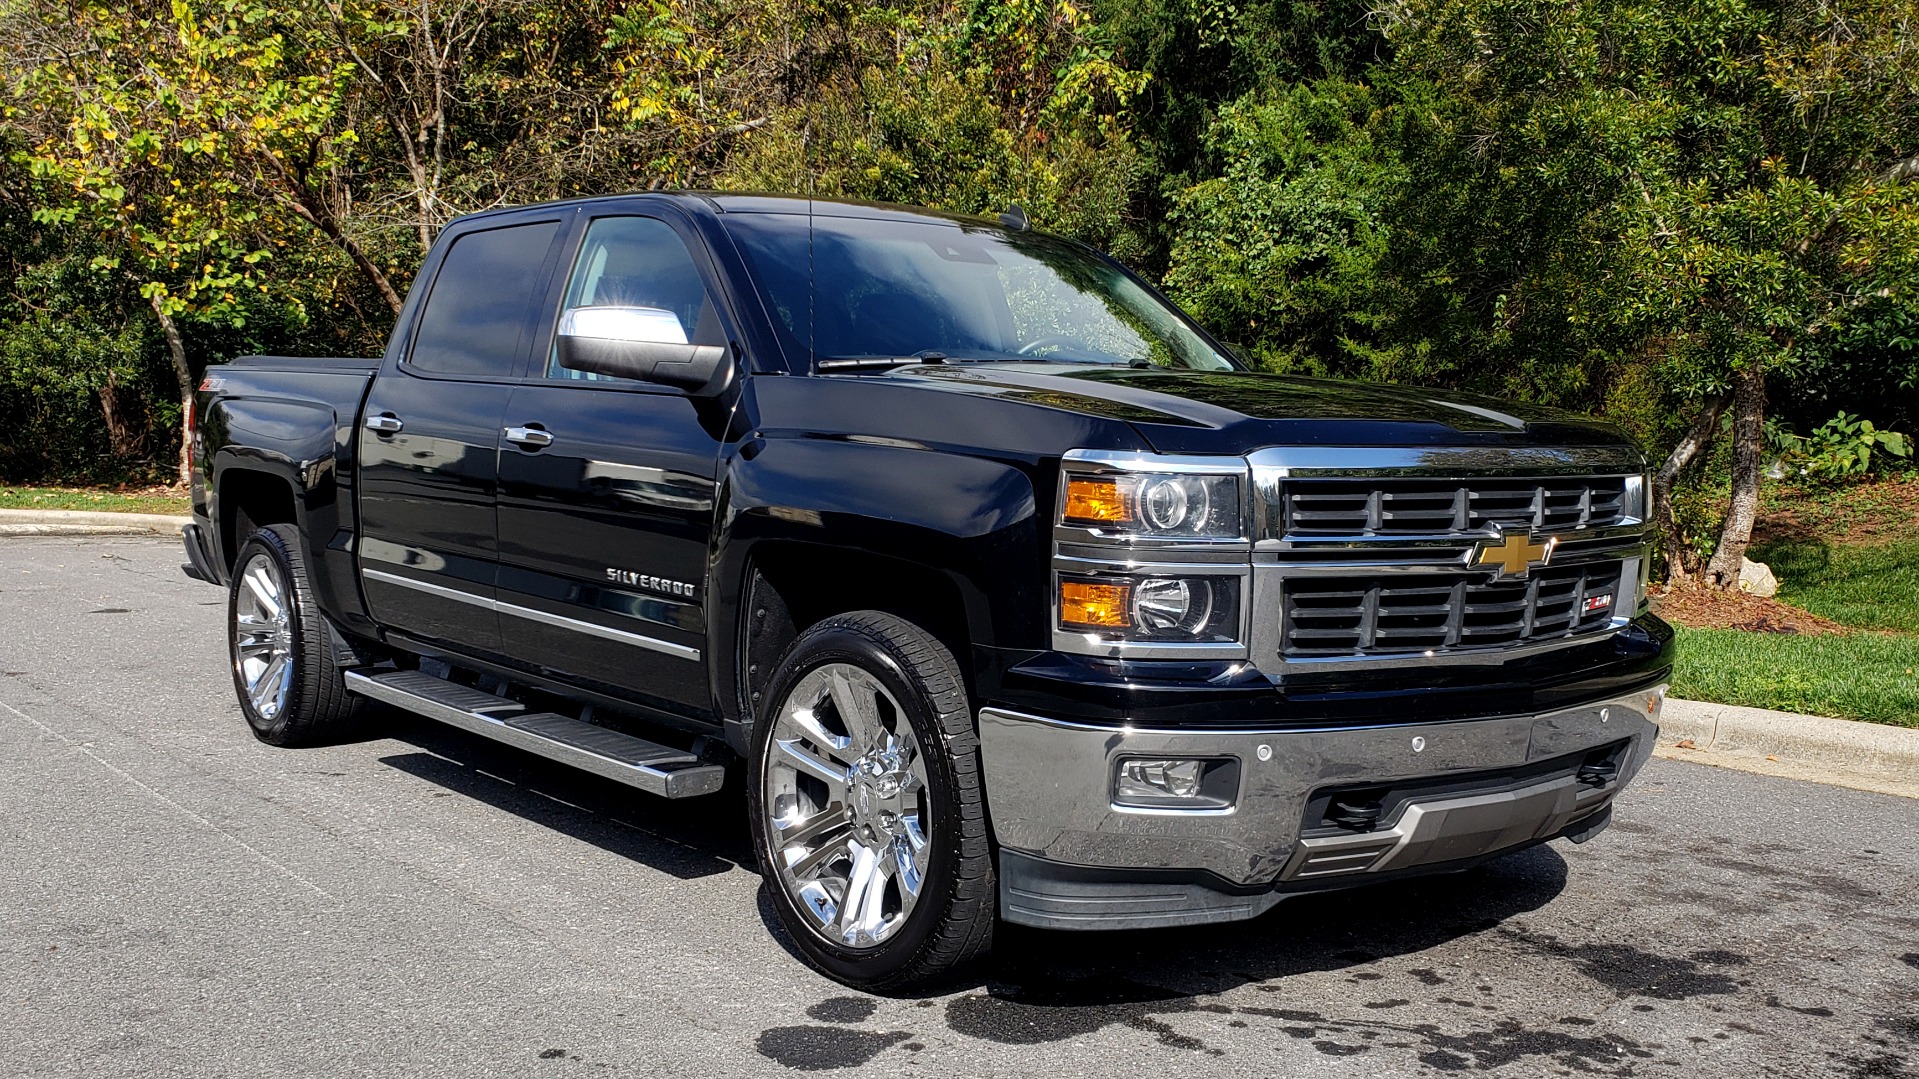 Used 2014 Chevrolet SILVERADO 1500 CREWCAB / LTZ PLUS PKG / 4WD / 2LZ / NAV / BOSE / REARVIEW for sale Sold at Formula Imports in Charlotte NC 28227 4